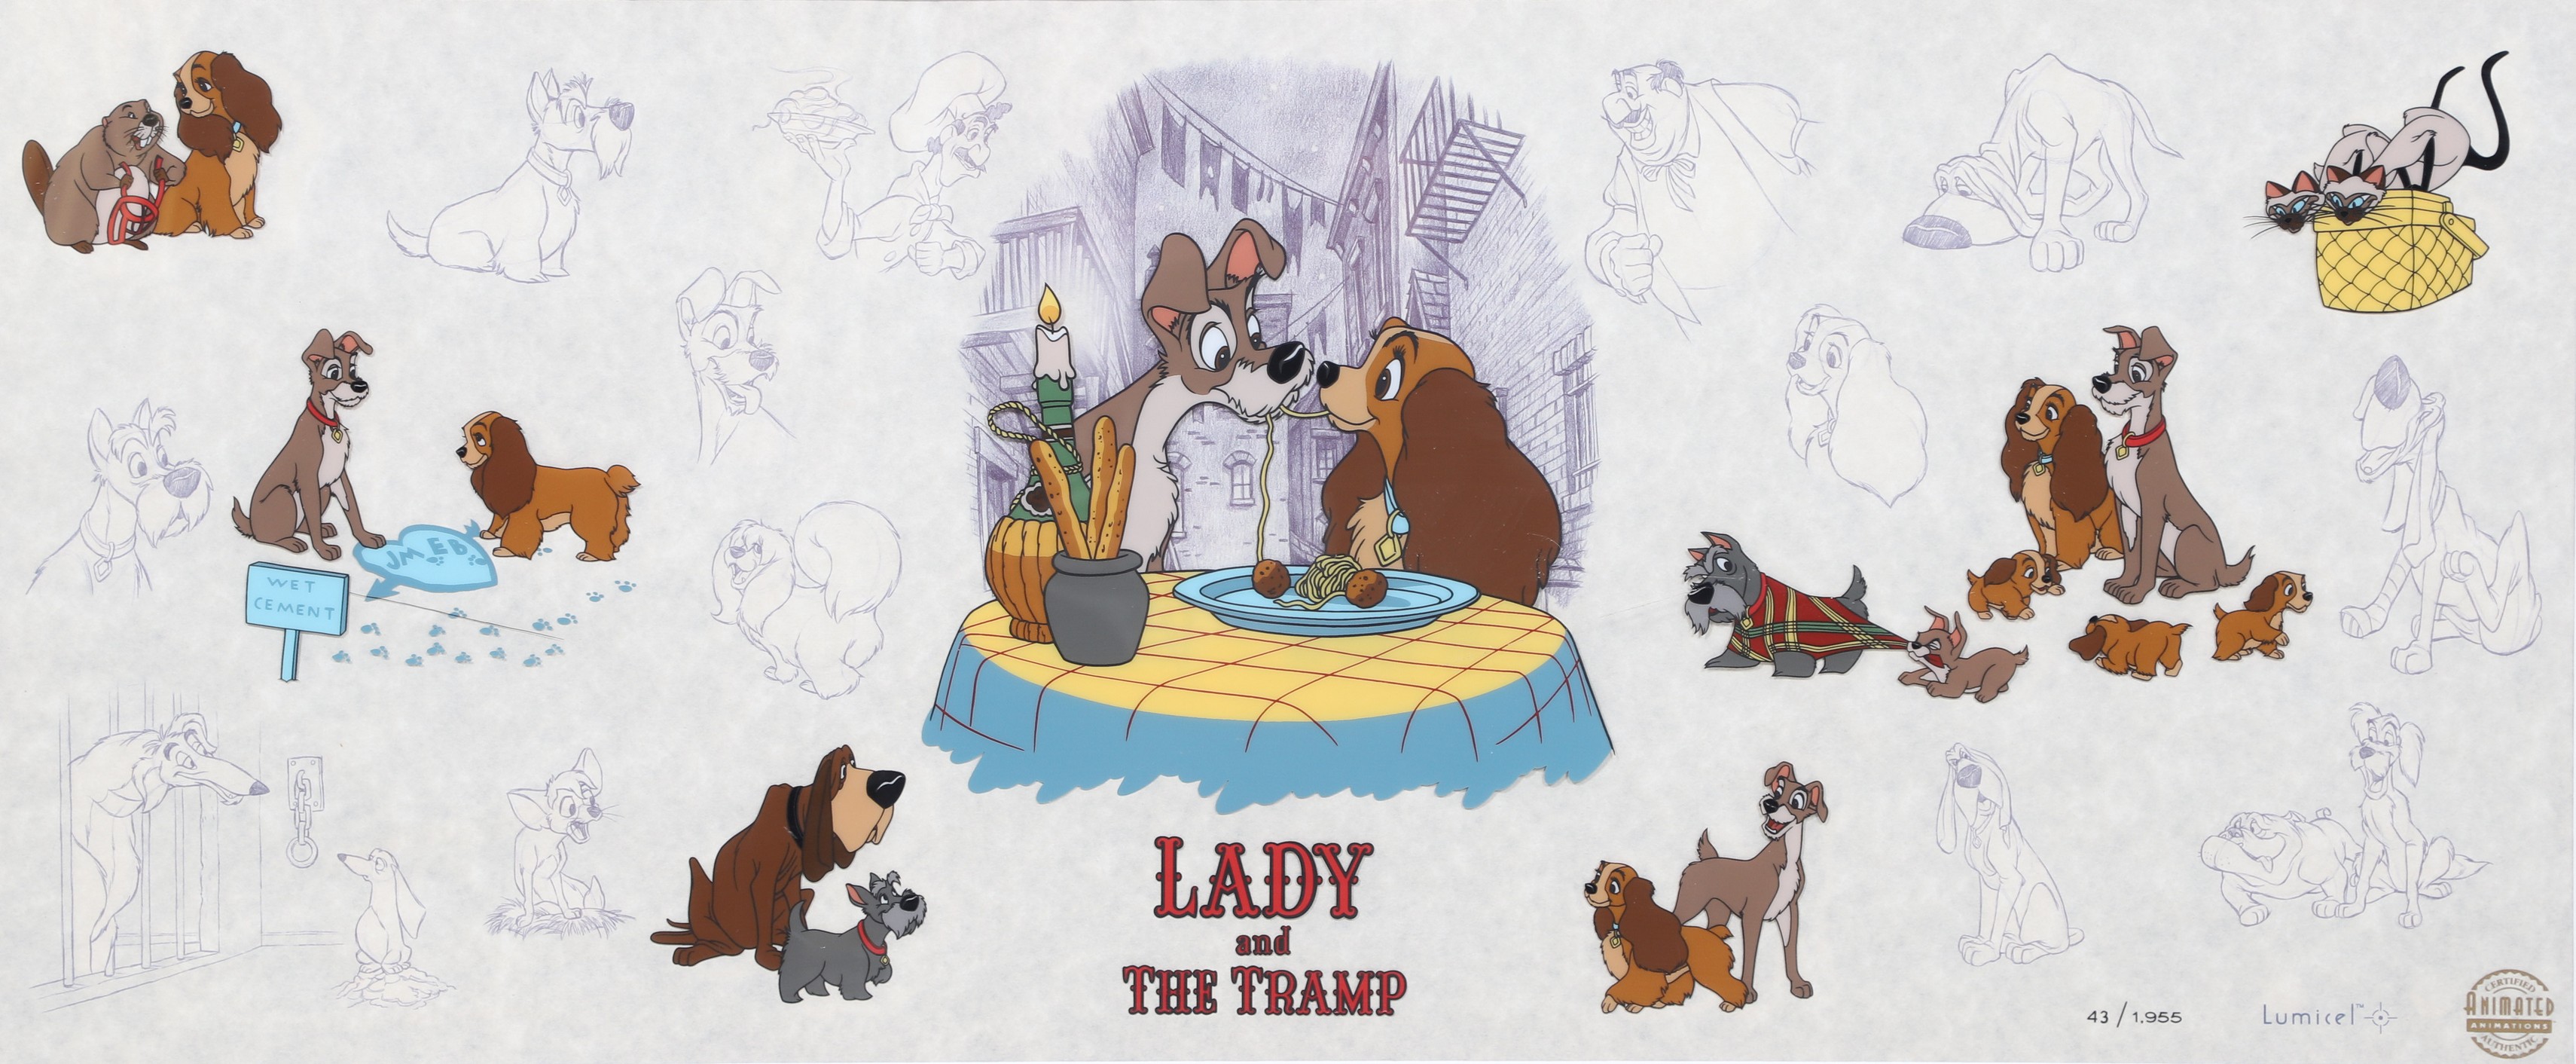 Lady & the Tramp Lumicel depicting characters